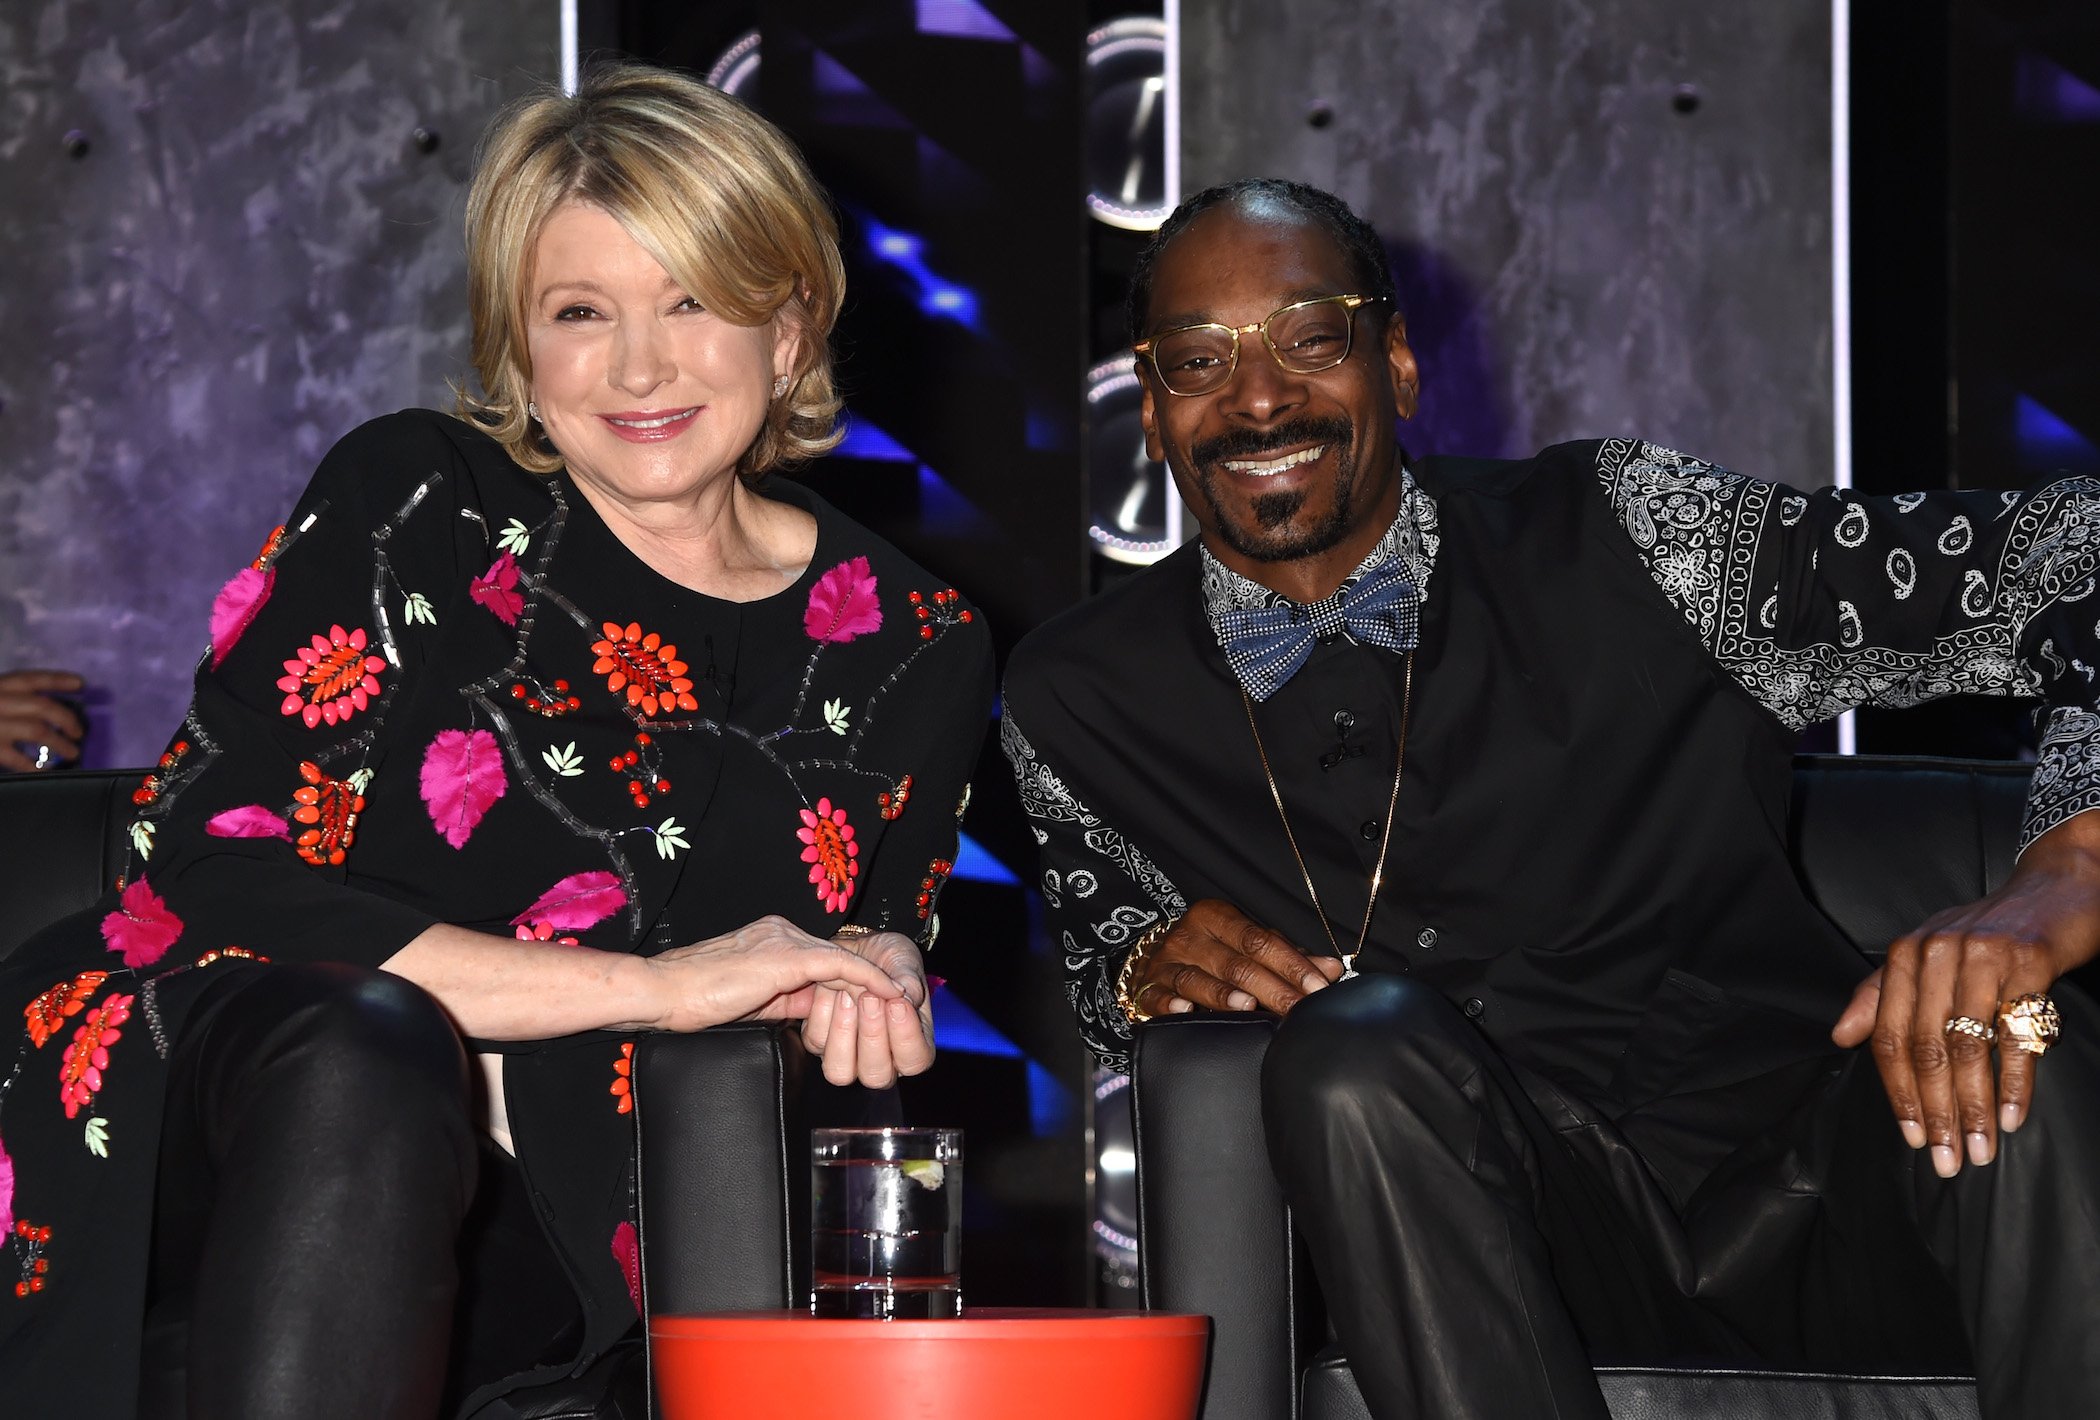 Snoop Dogg and Martha Stewart: Who Has the Higher Net Worth?